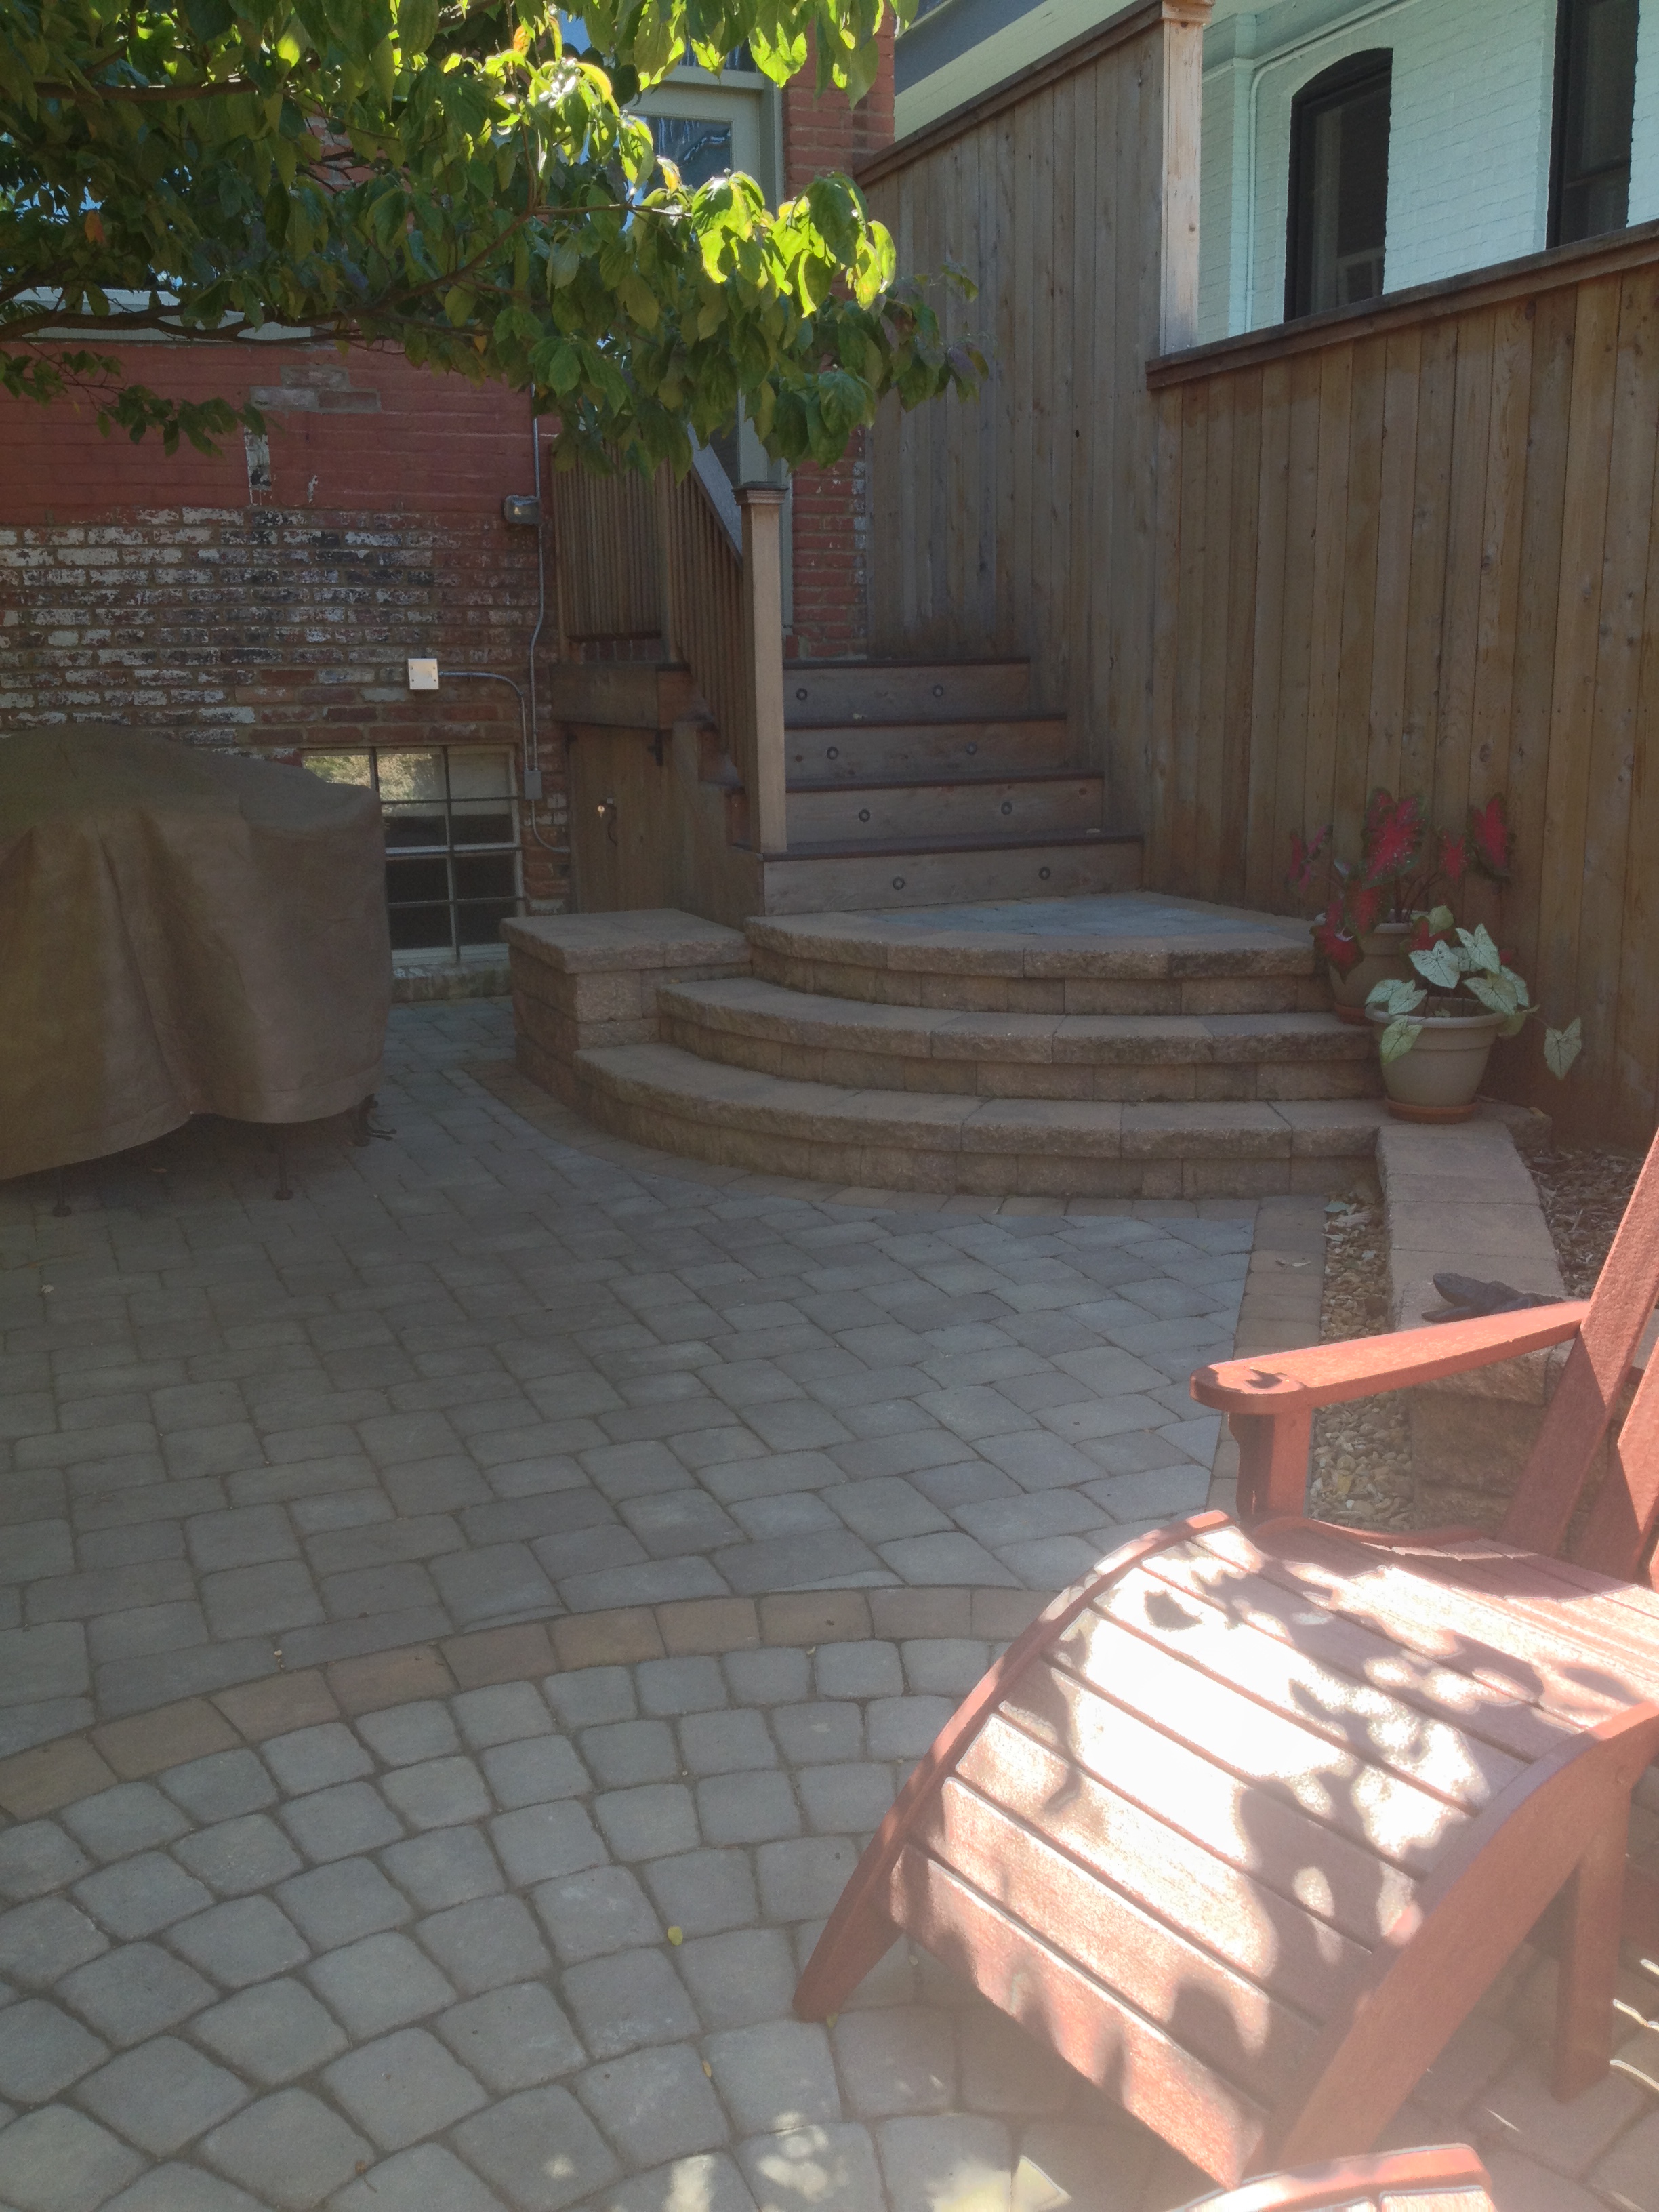  Completed Paver Stone Patio and Stairs with Custom Designed Pattern 